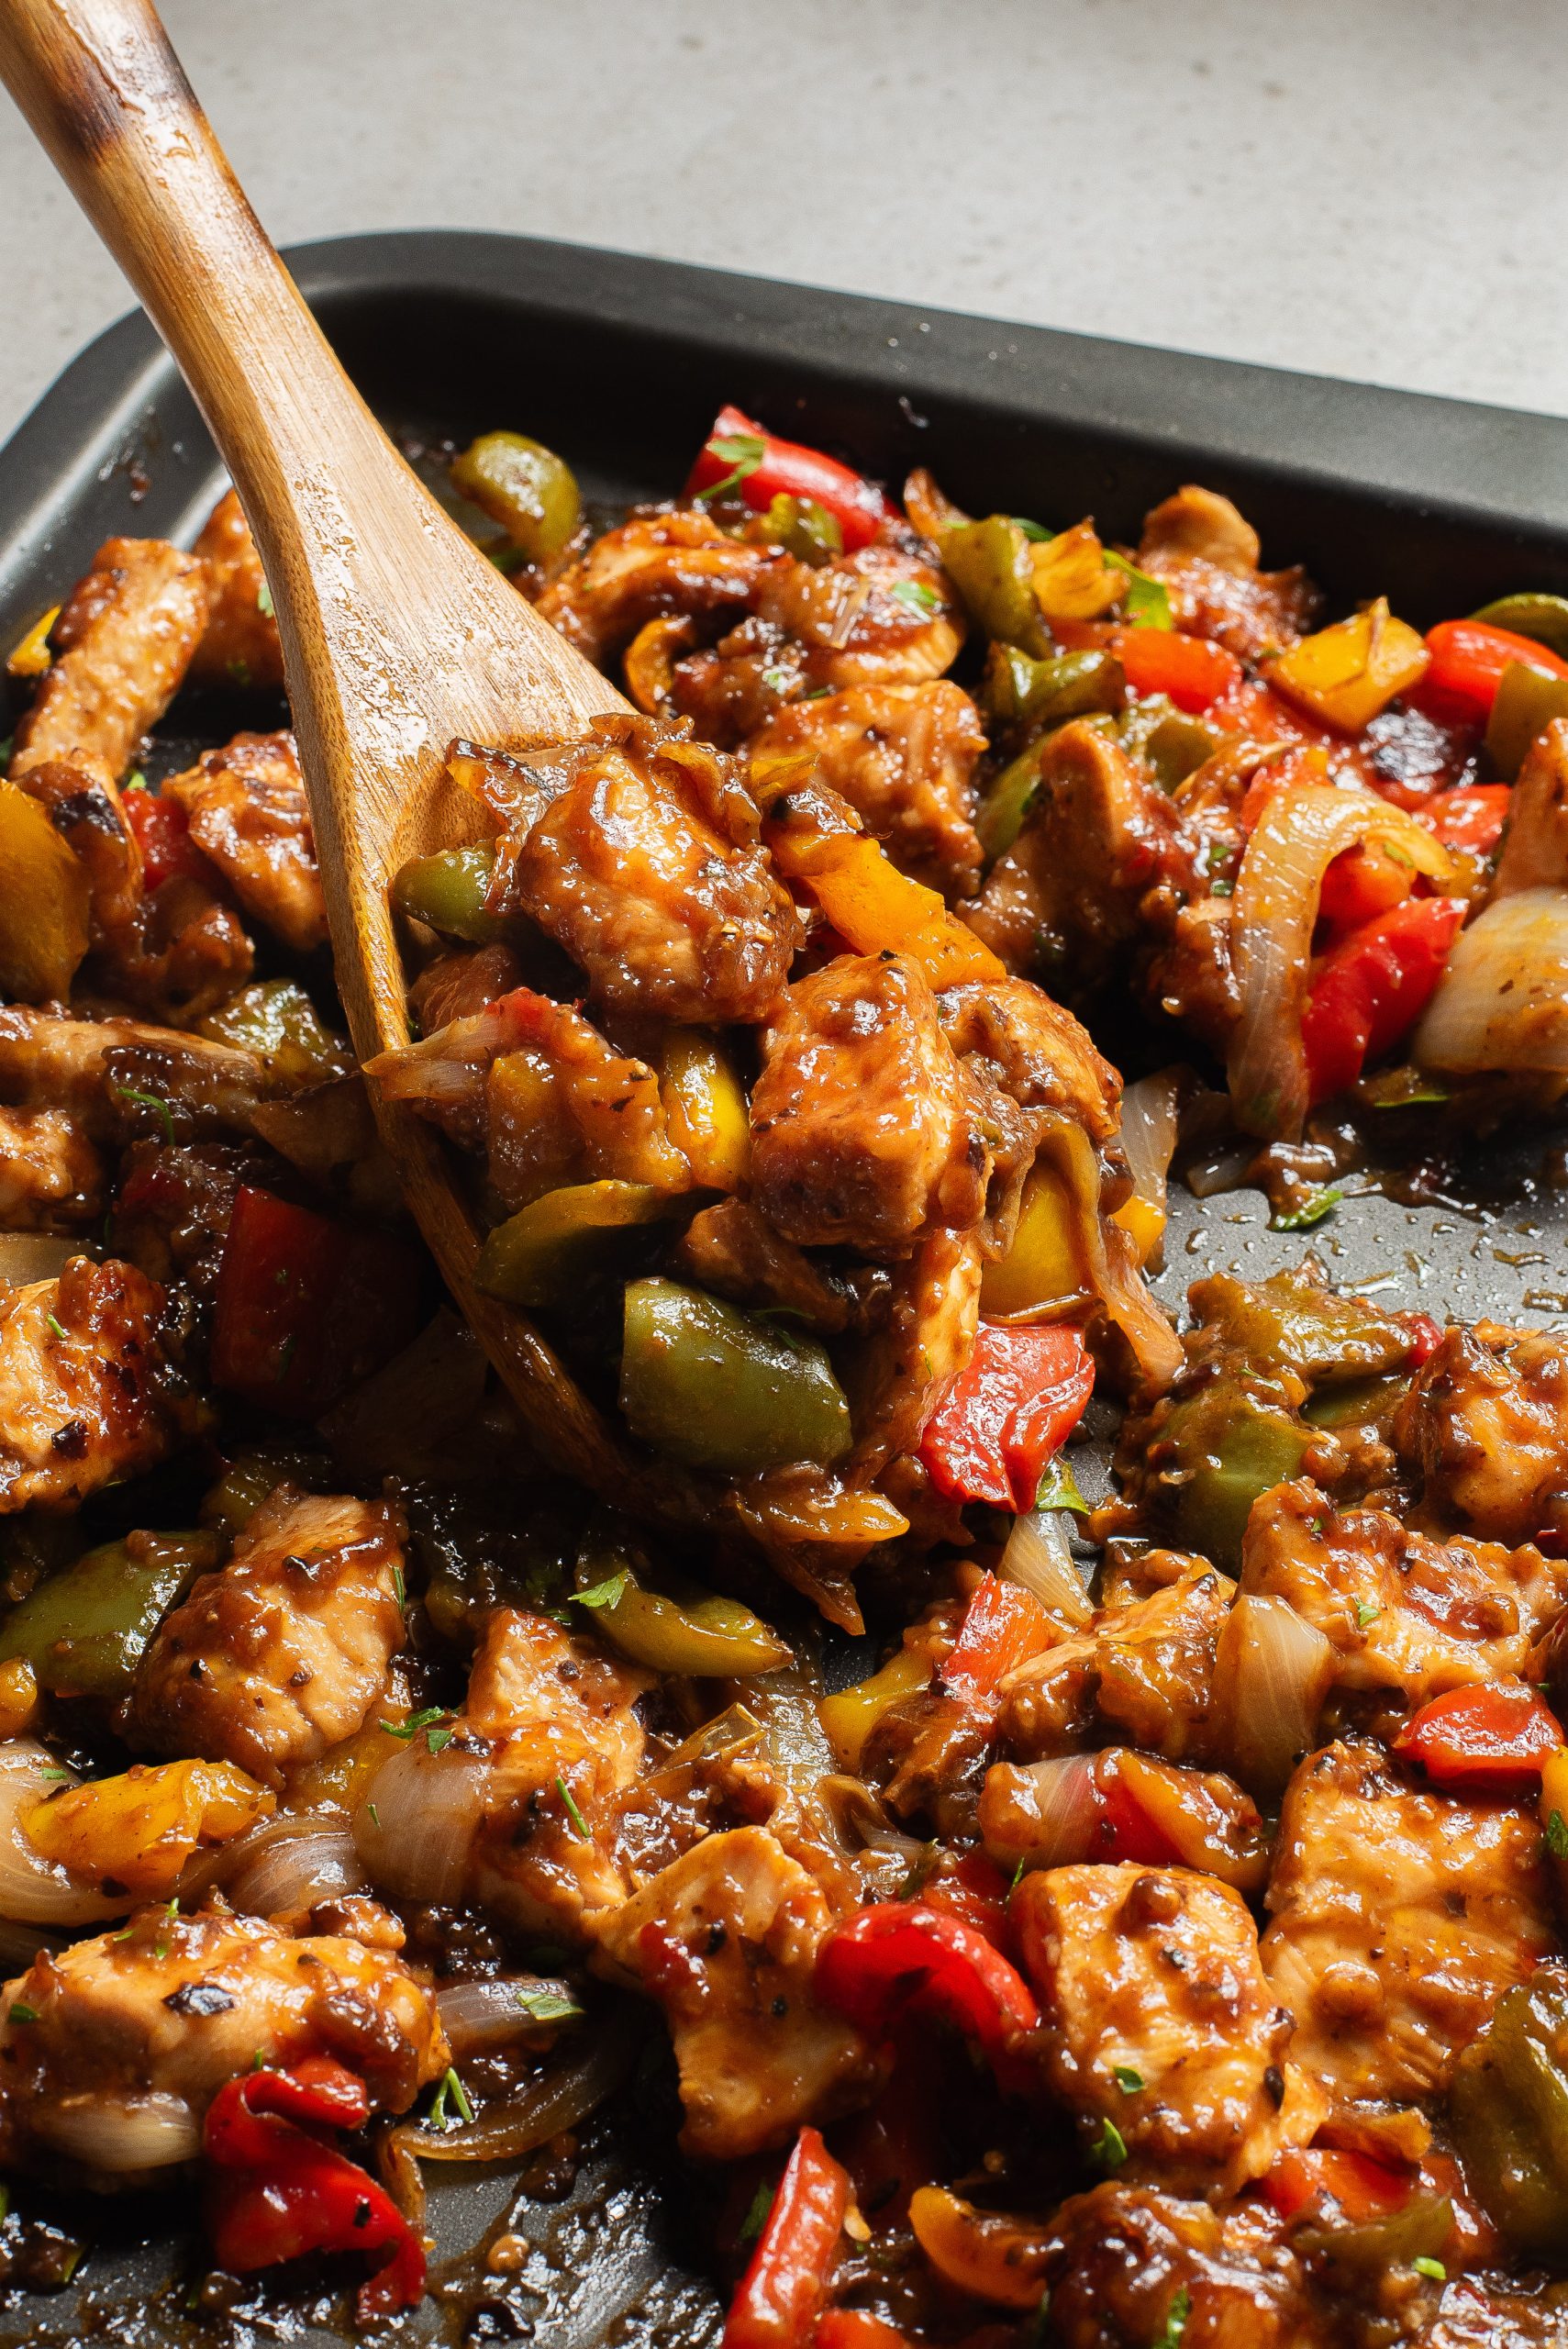 A skillet filled with stir-fried chicken and vegetables including bell peppers and onions, with a wooden spoon.